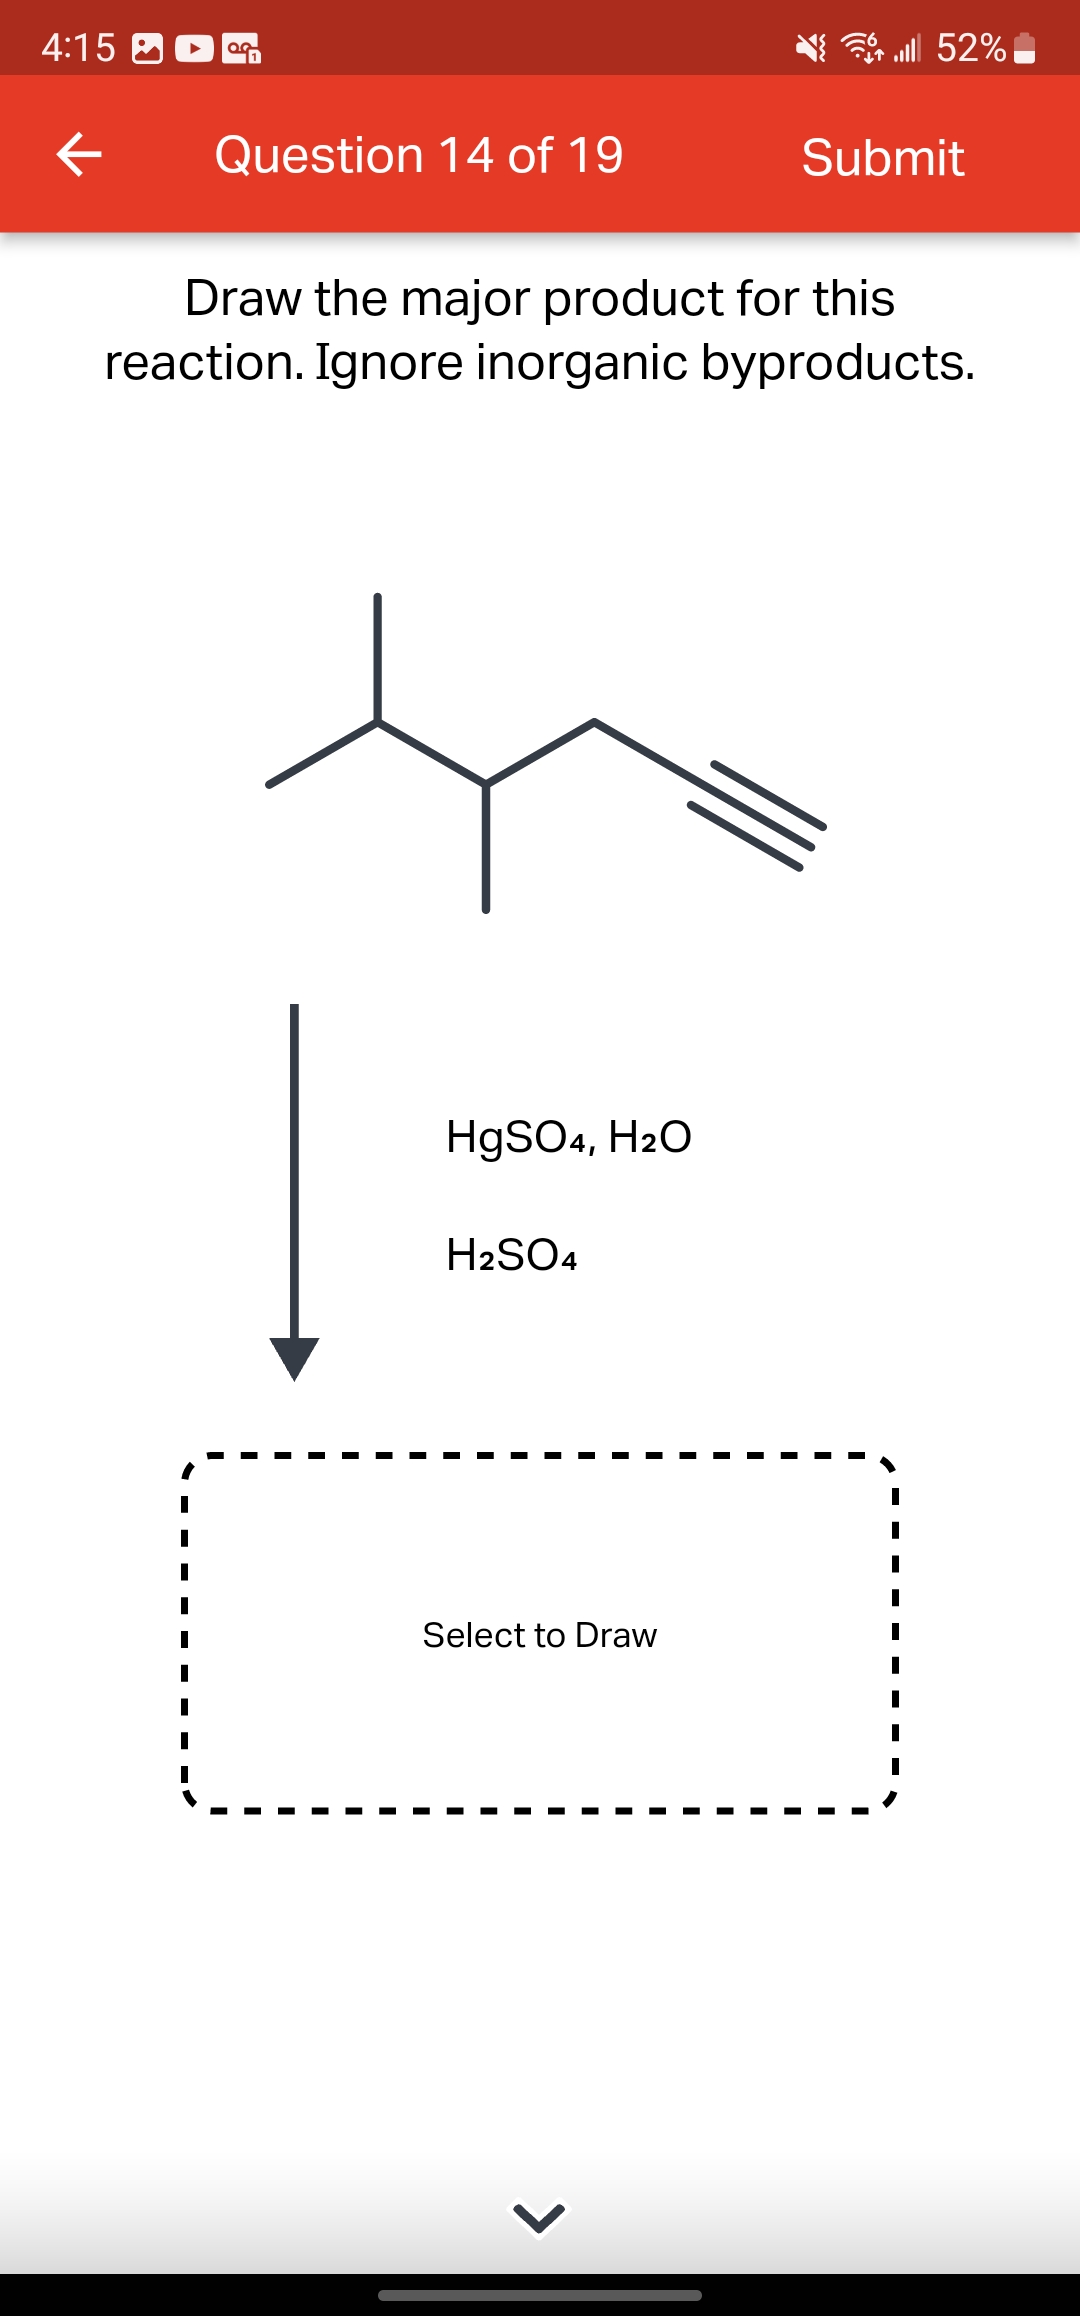 4:15
←
OG
Question 14 of 19
HgSO4, H₂O
Draw the major product for this
reaction. Ignore inorganic byproducts.
H₂SO4
Select to Draw
lll 52%
>
Submit